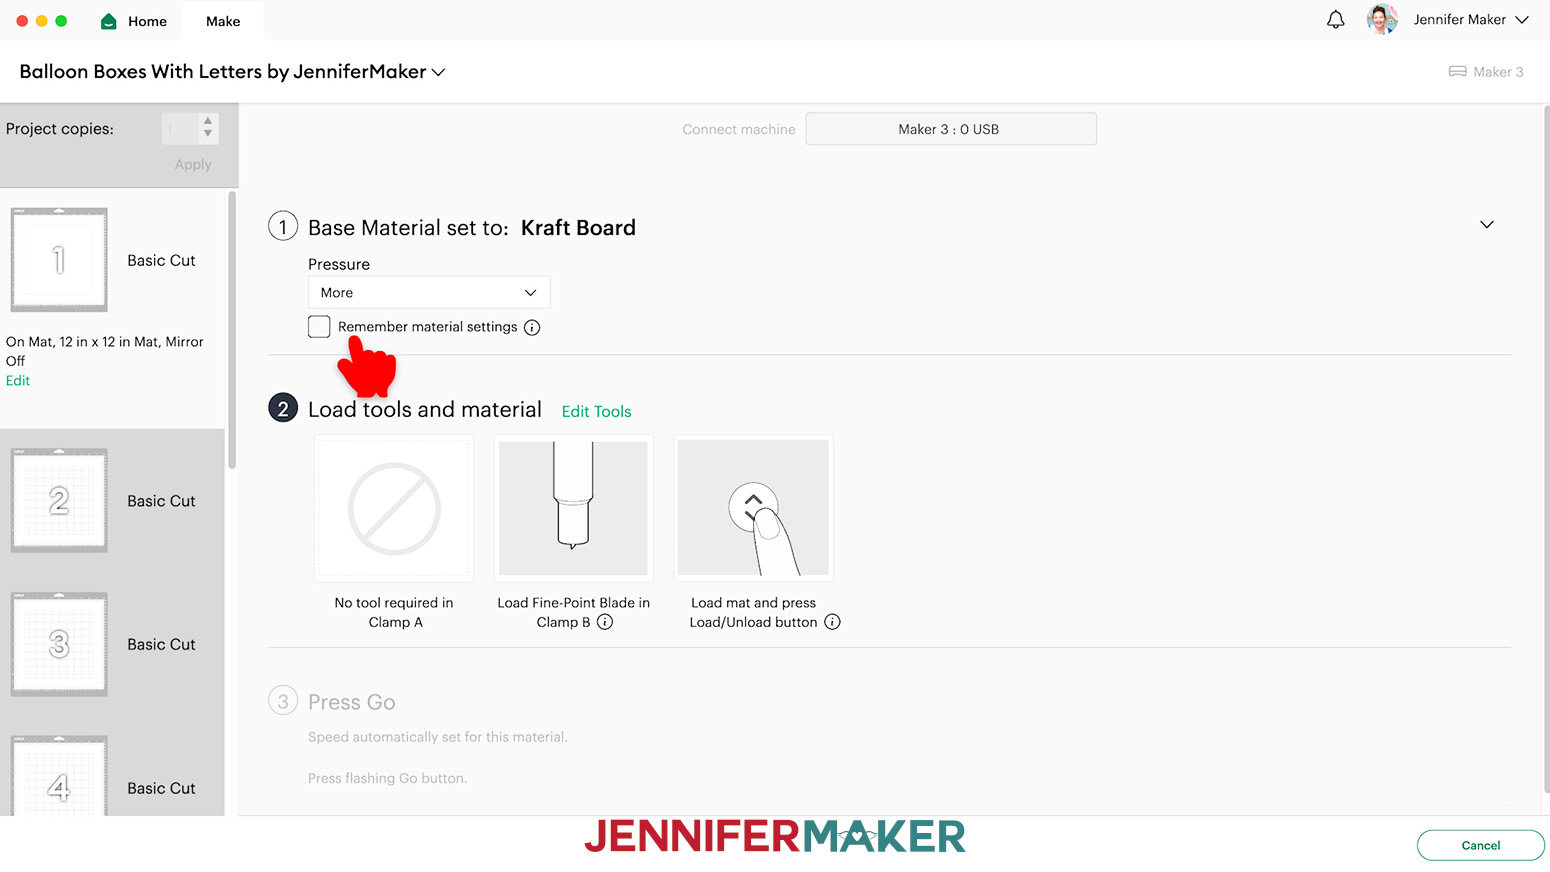 Design Space material settings for the kraft board are set to Kraft Board with more pressure.